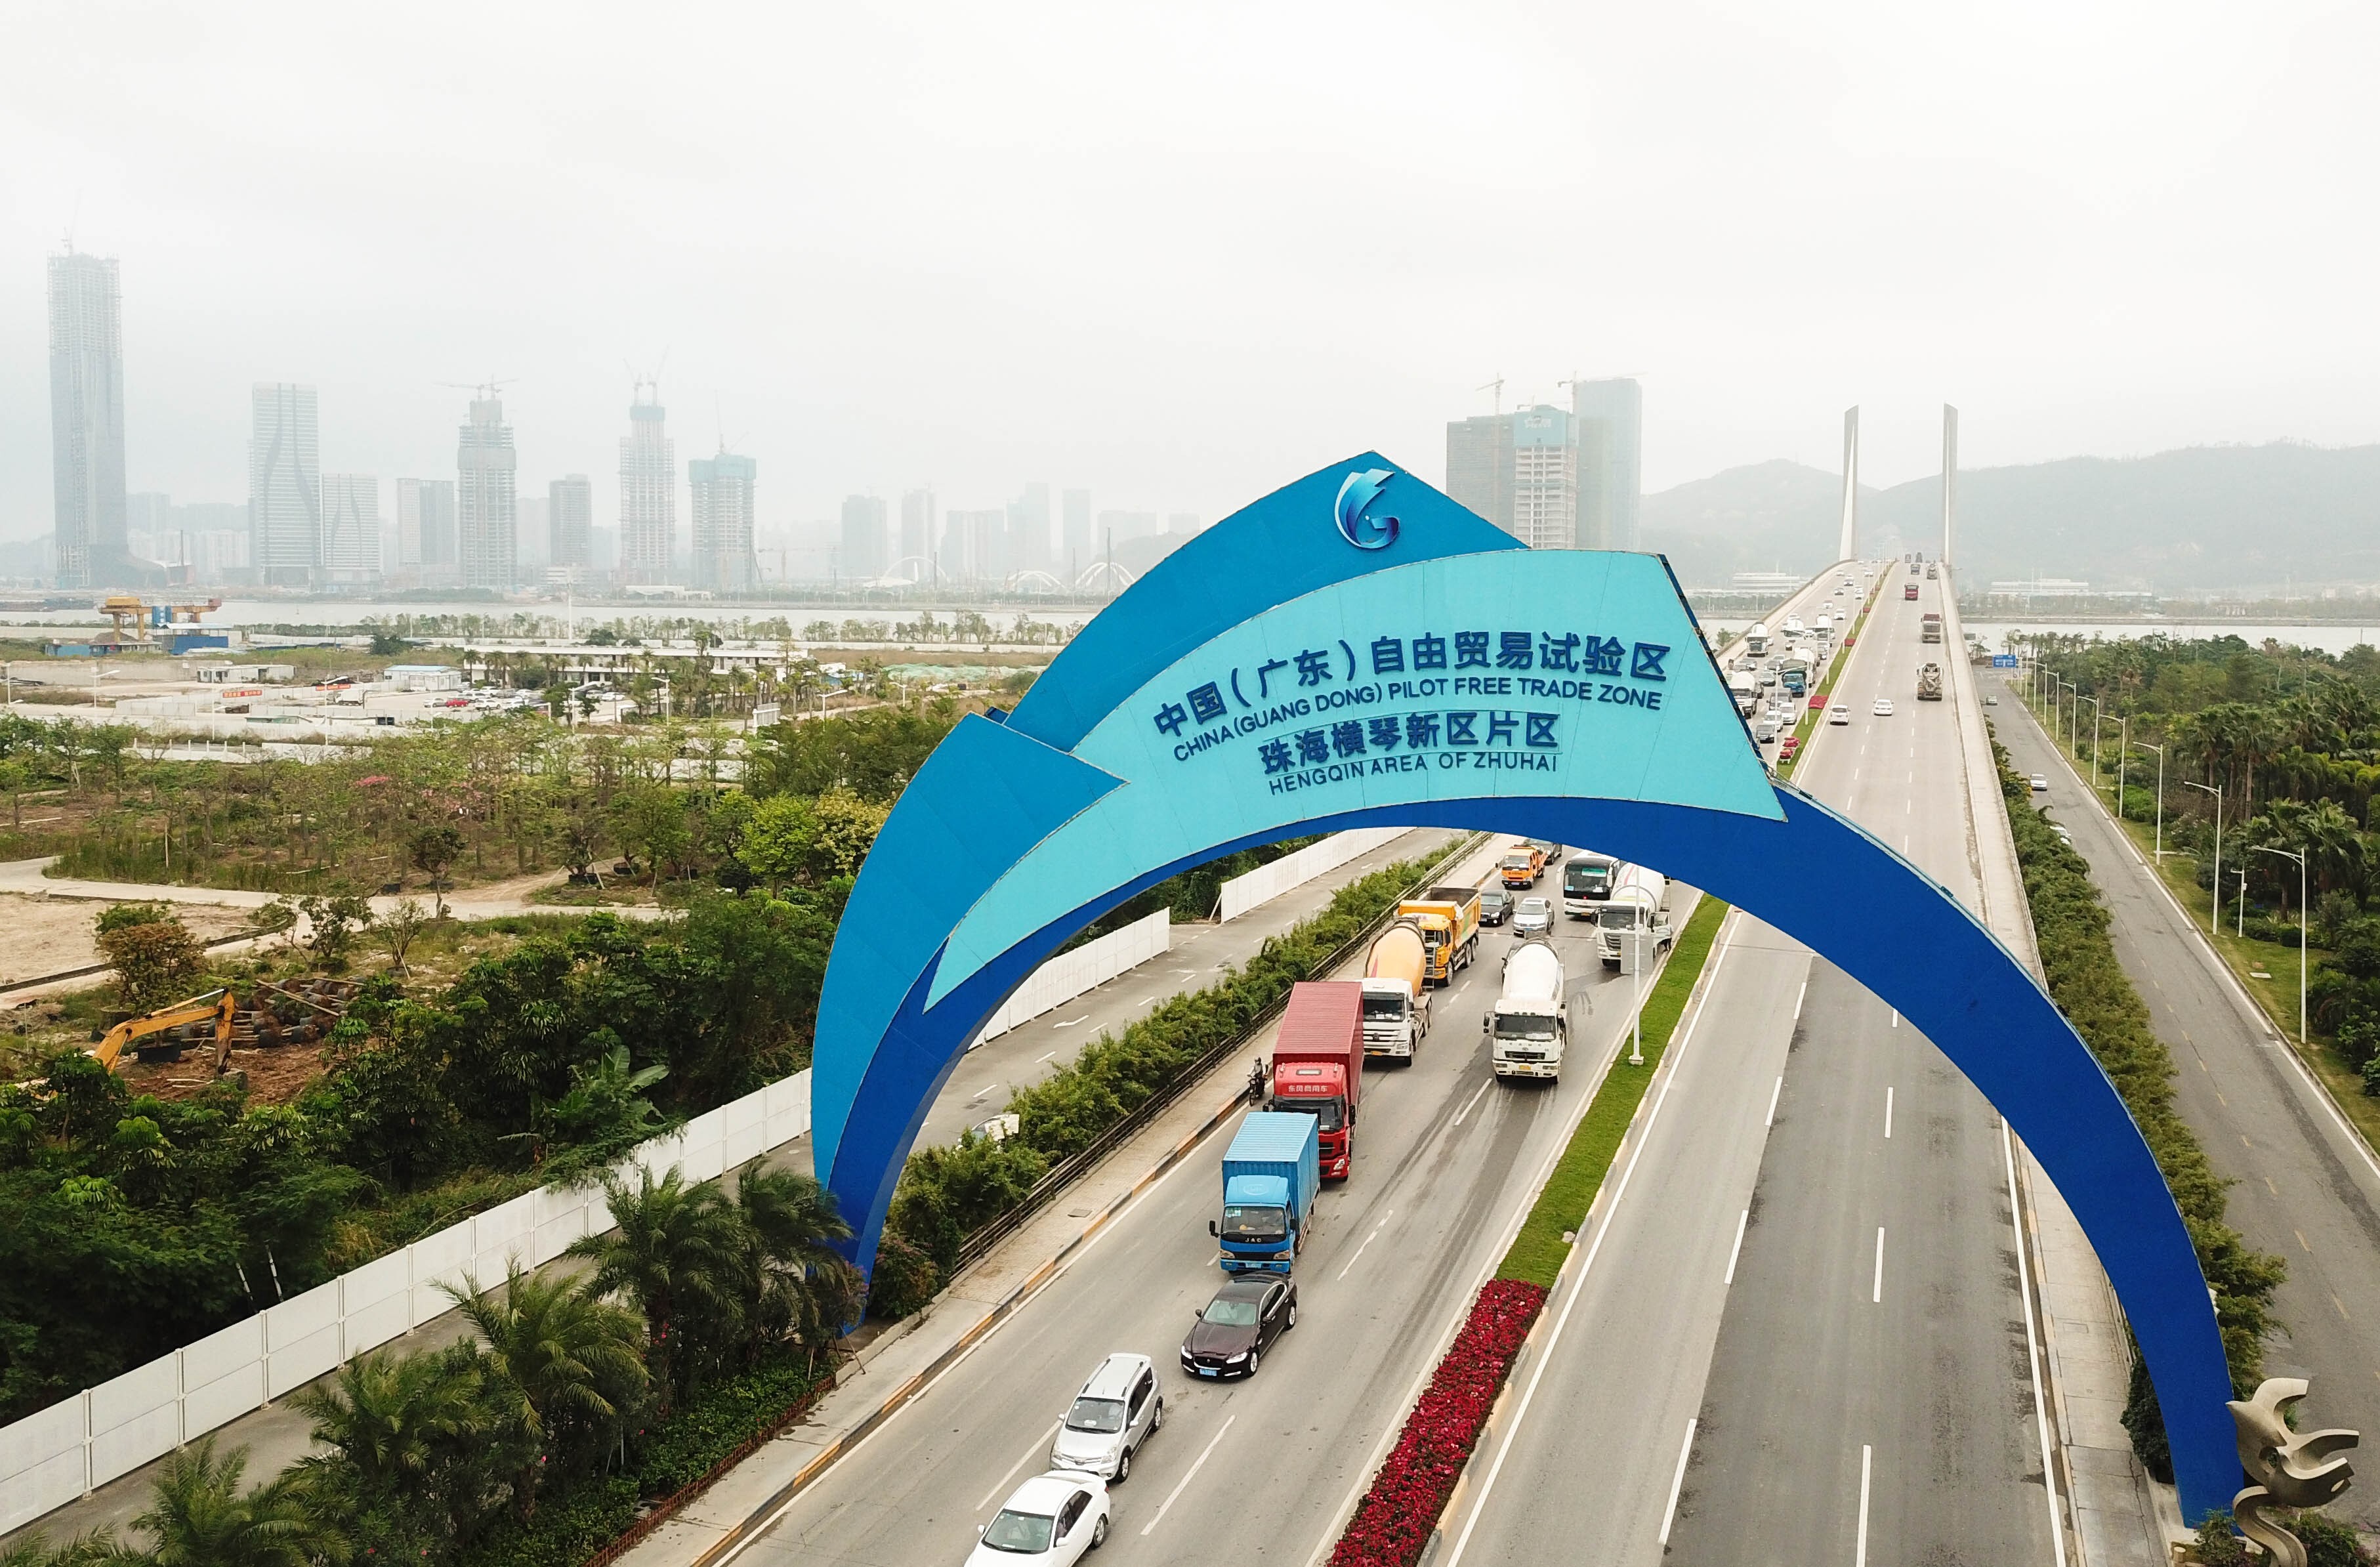 Vehicles run on the Hengqin Bridge in Zhuhai’s free trade zone located in southern Guangdong province in November 2018. Photo: Xinhua